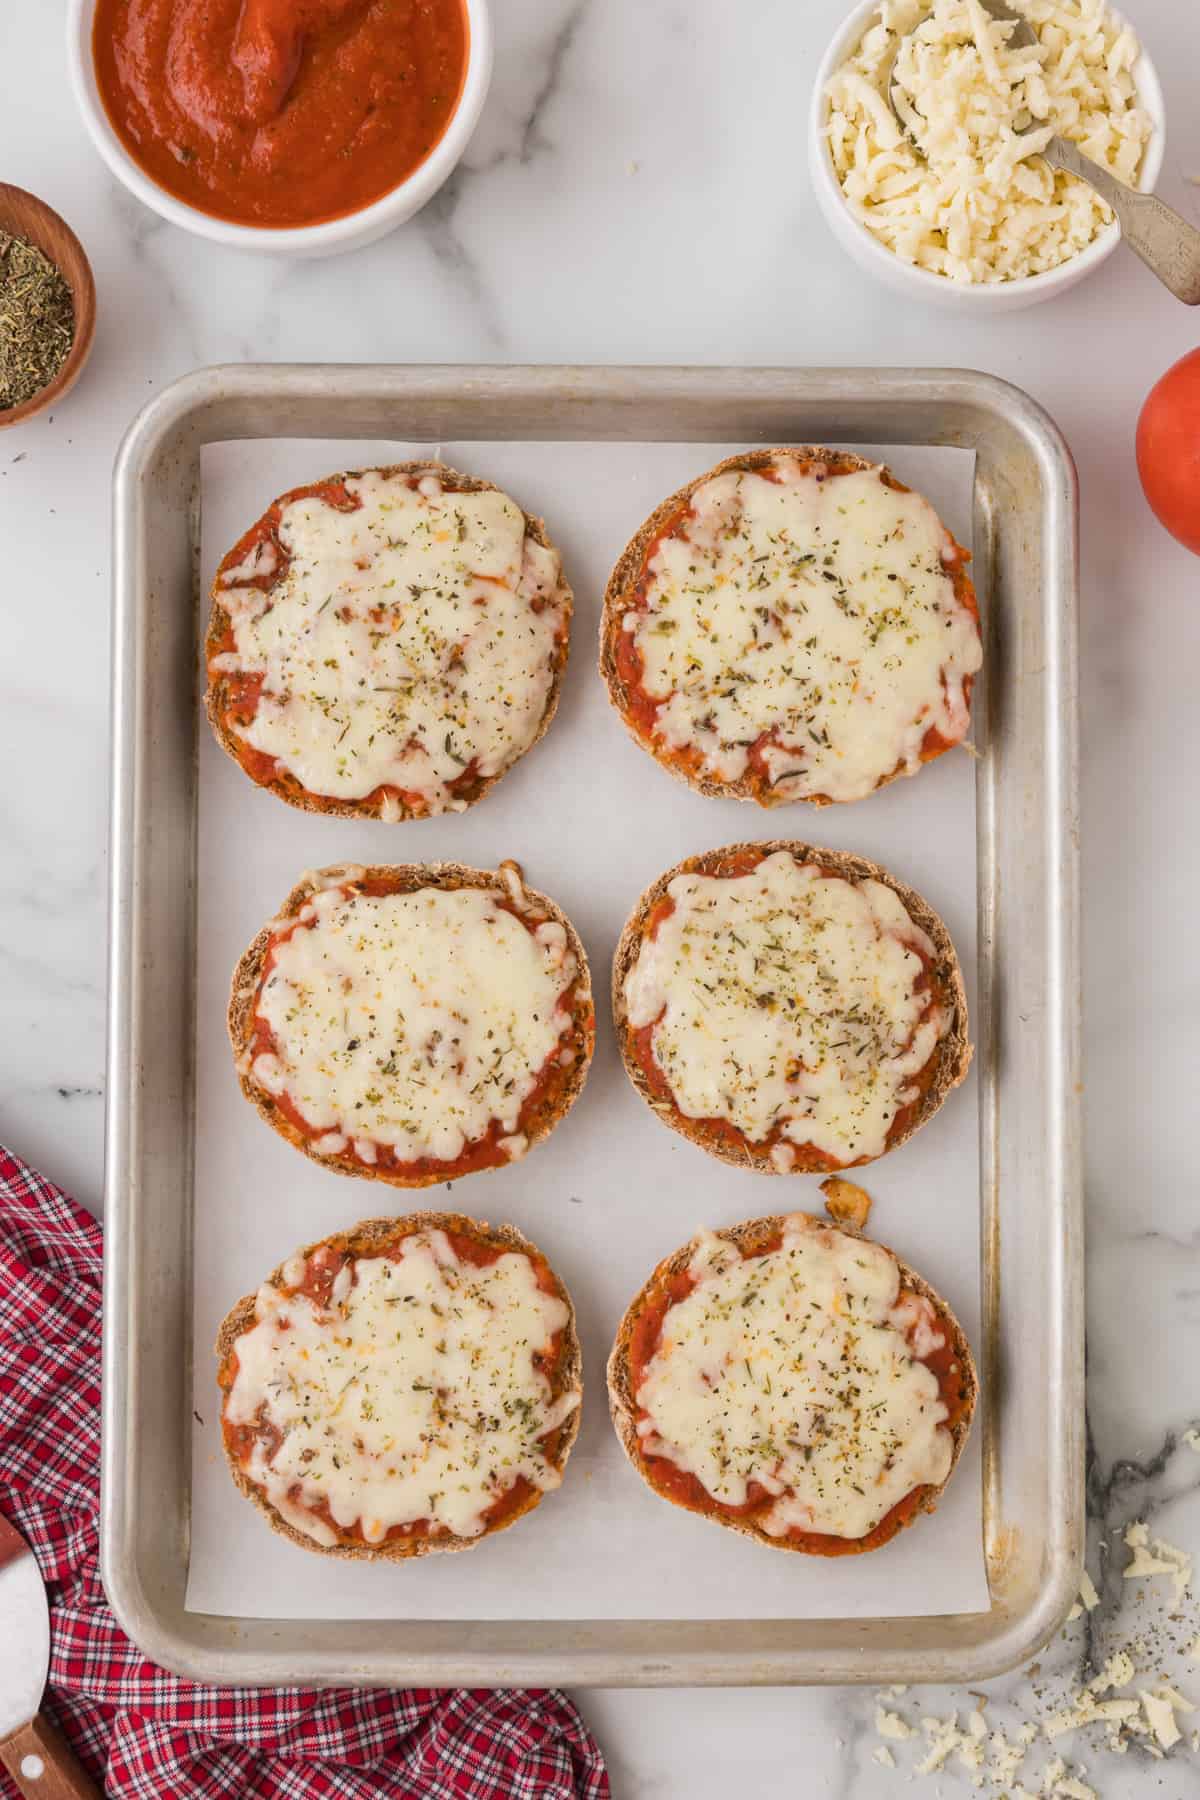 A baking sheet with mini pizzas made with english muffins on it.